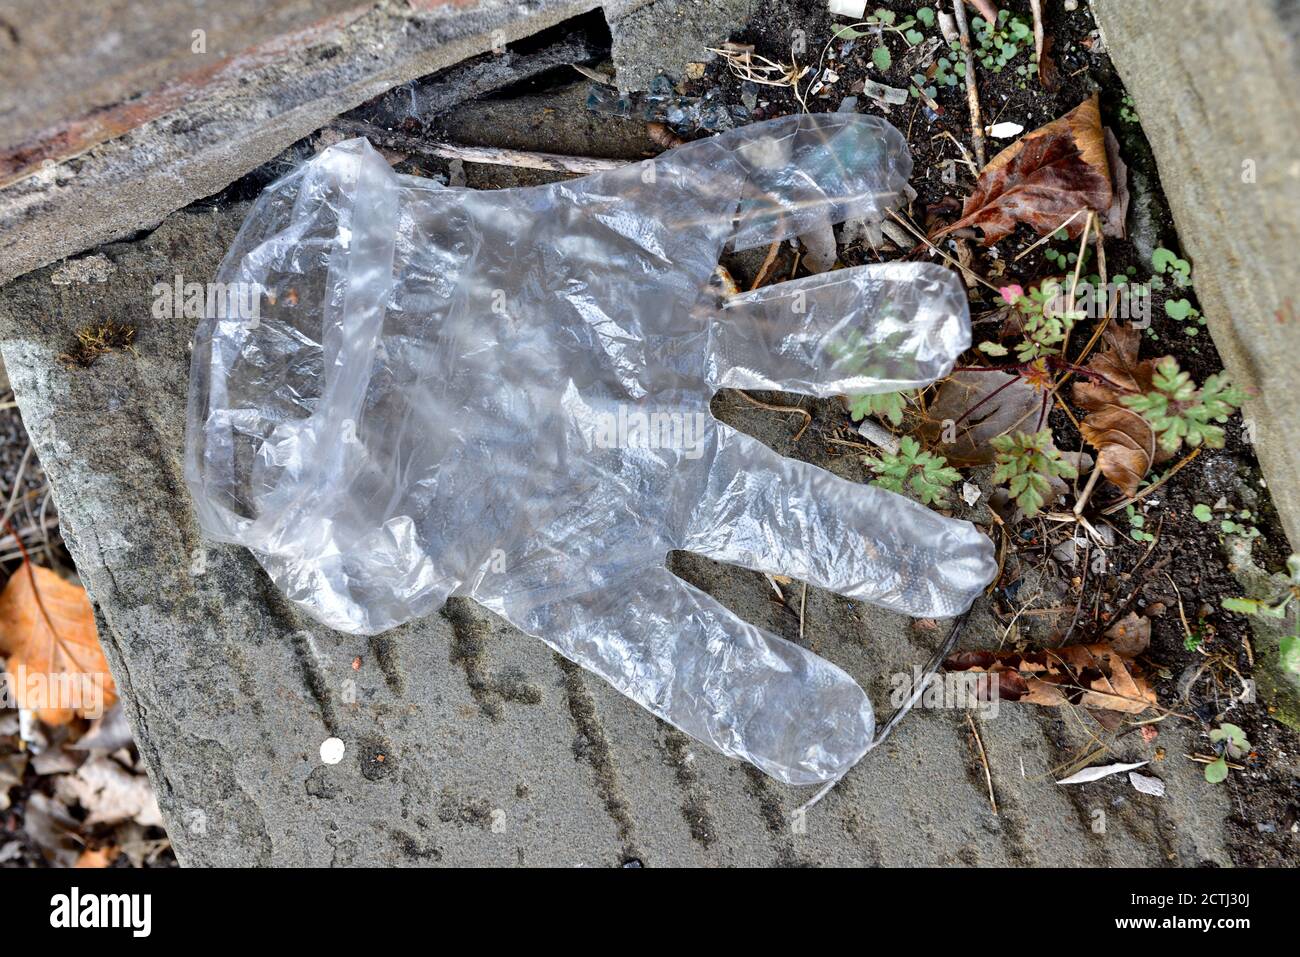 Discarded disposable plastic glove as waste on pavement Stock Photo